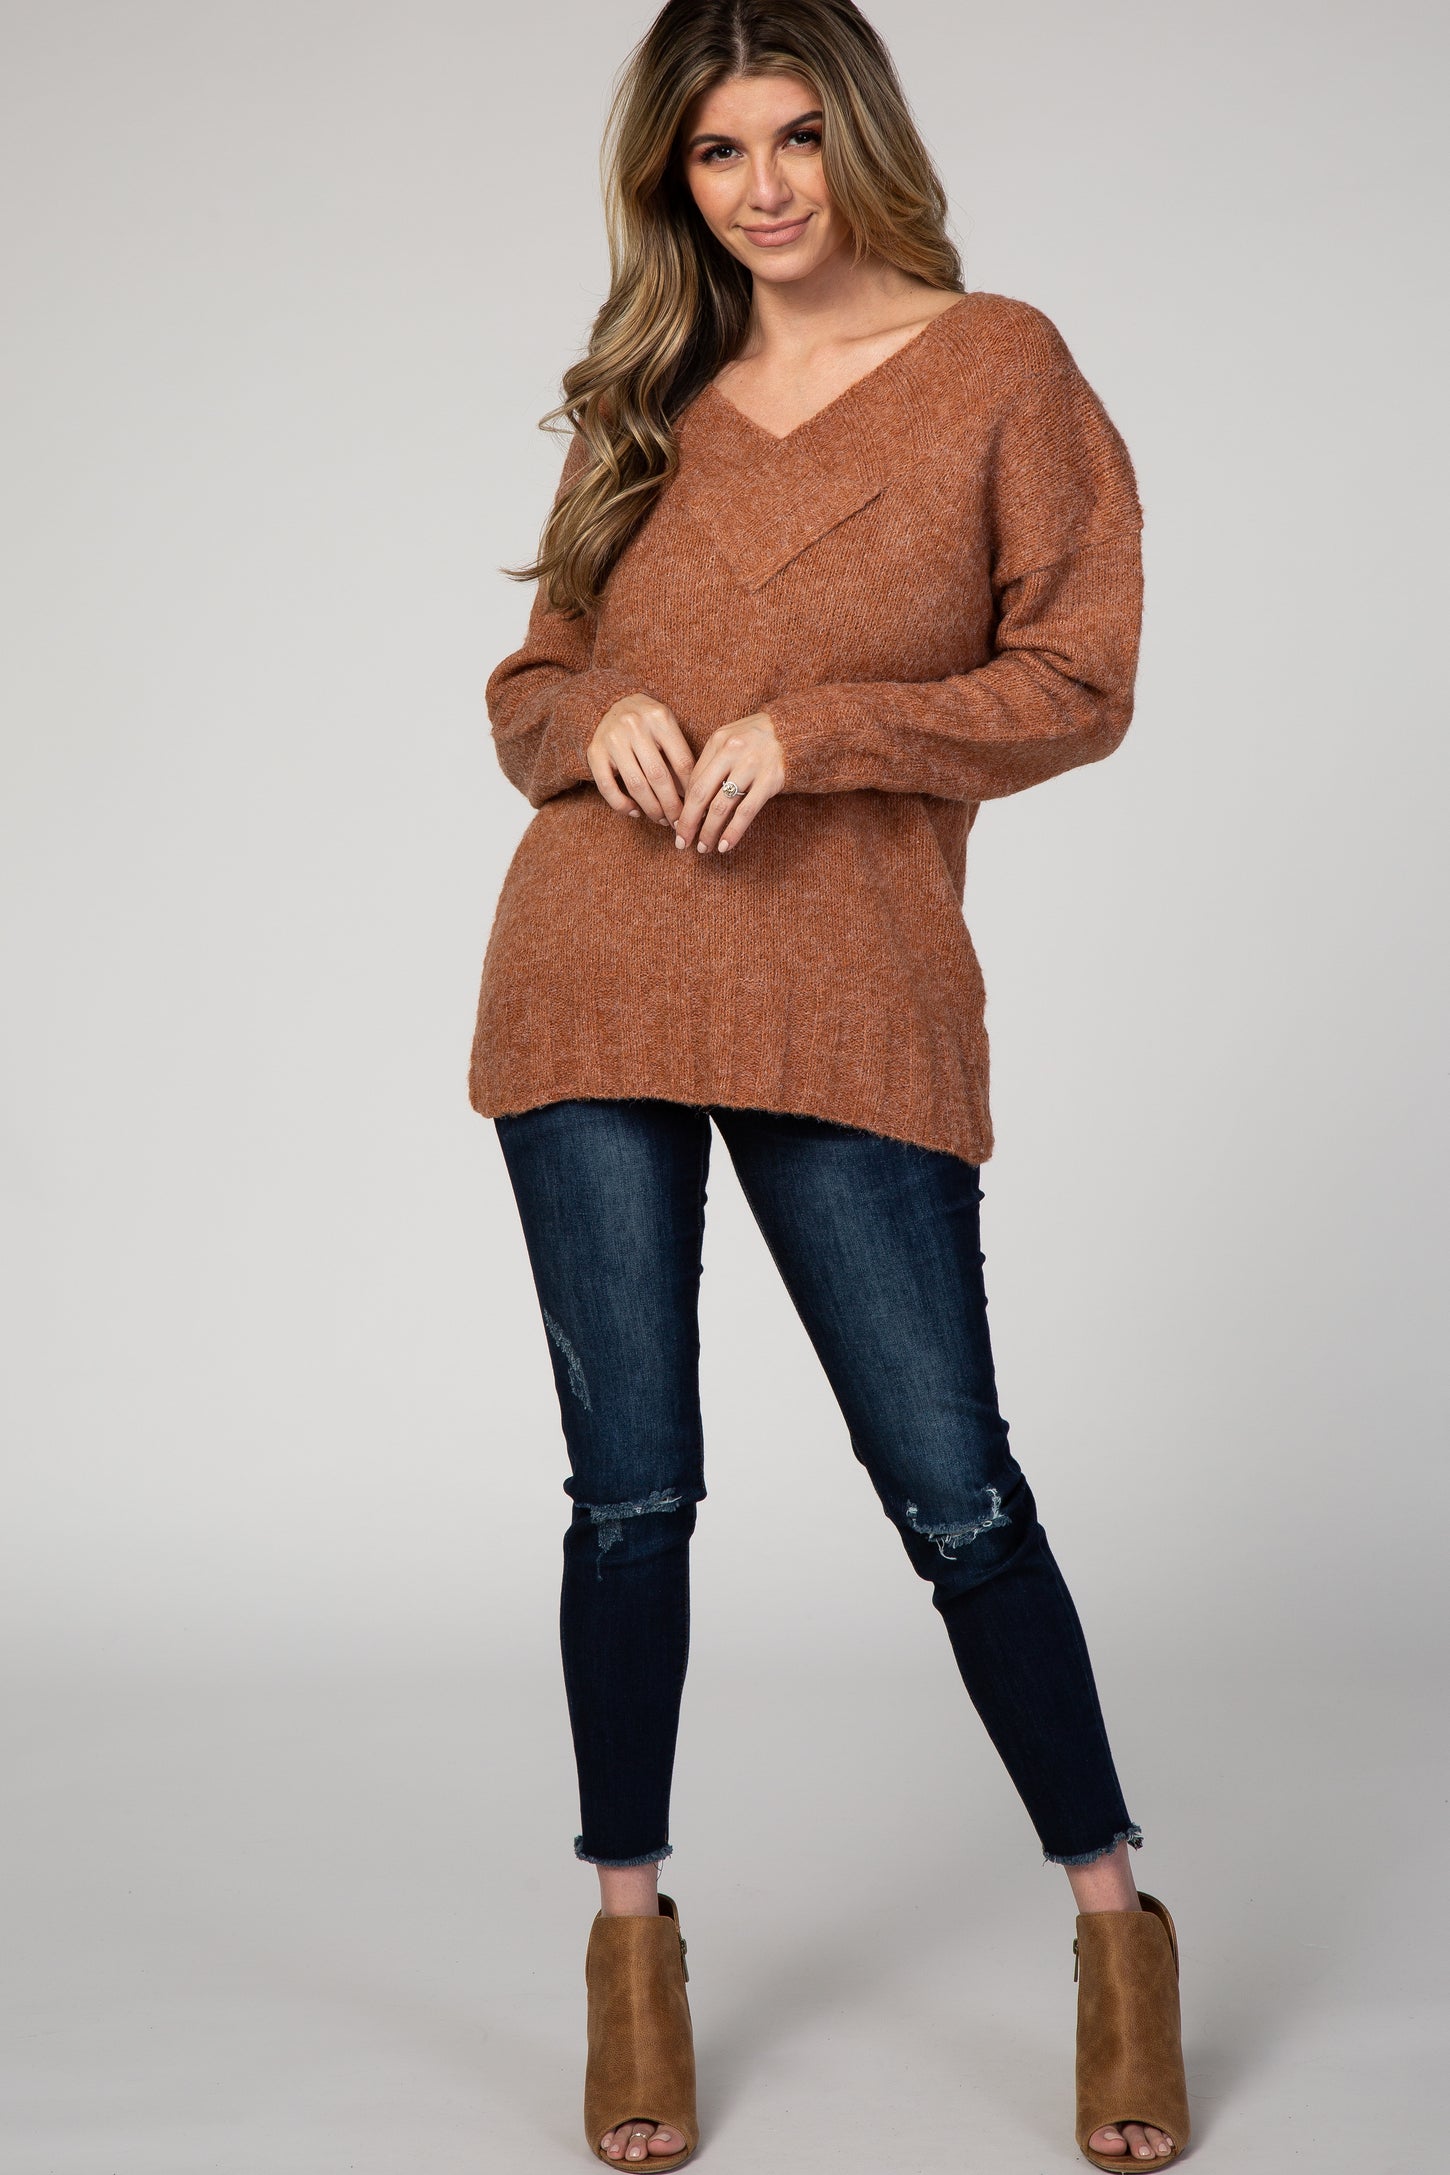 Rust Solid V-Neck Sweater